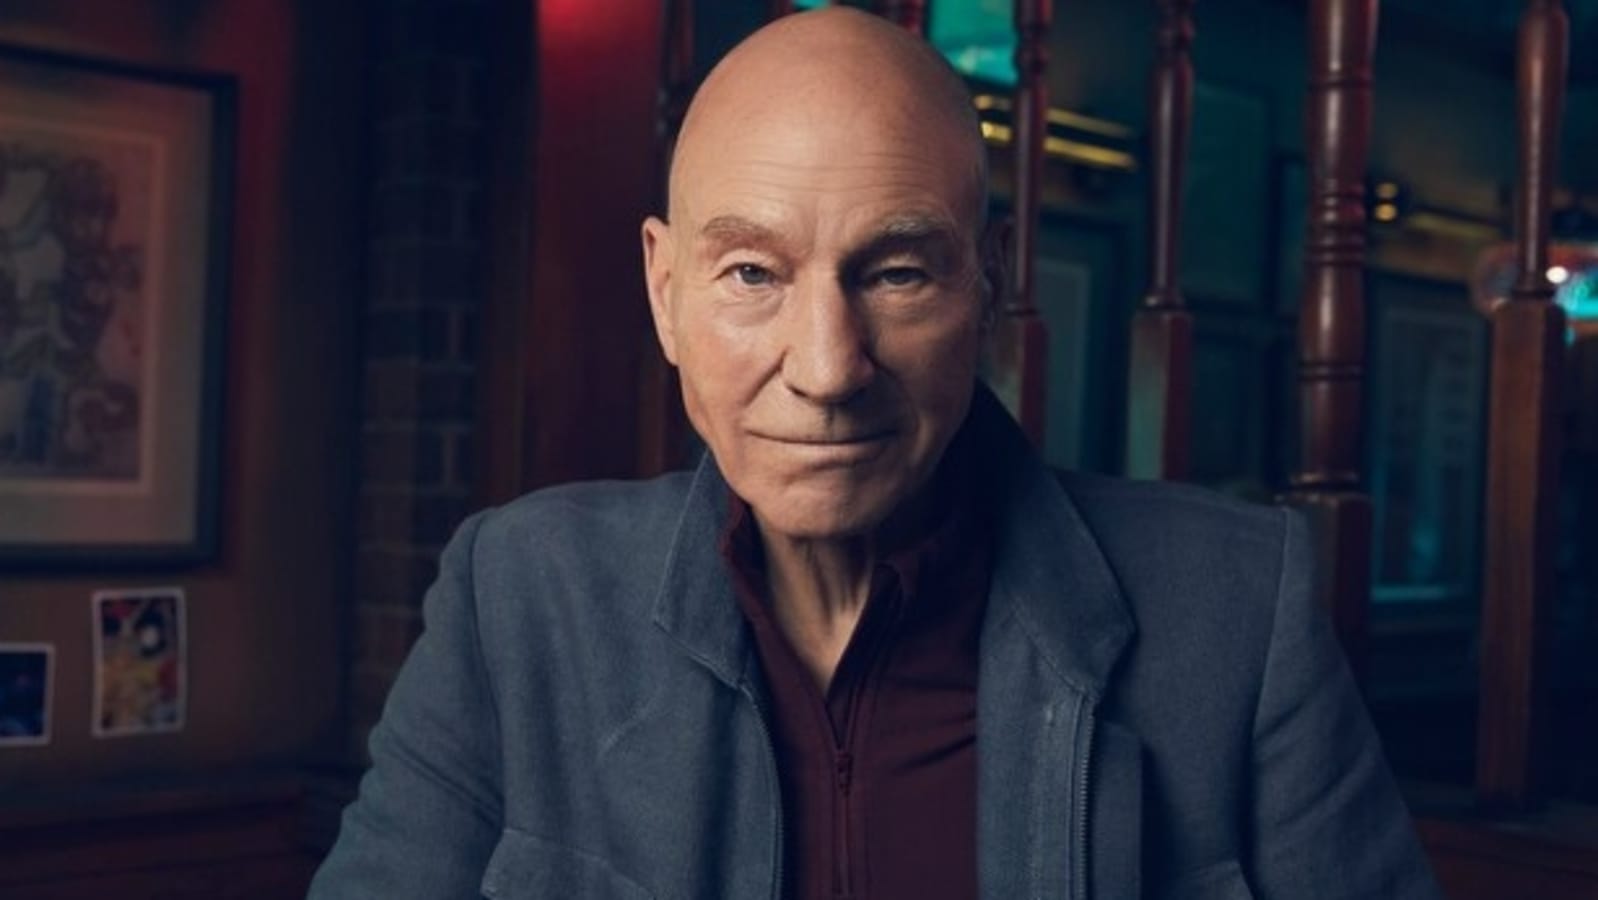 Exclusive: Patrick Stewart going back to Charles Xavier, Picard made lives difficult for those close to him